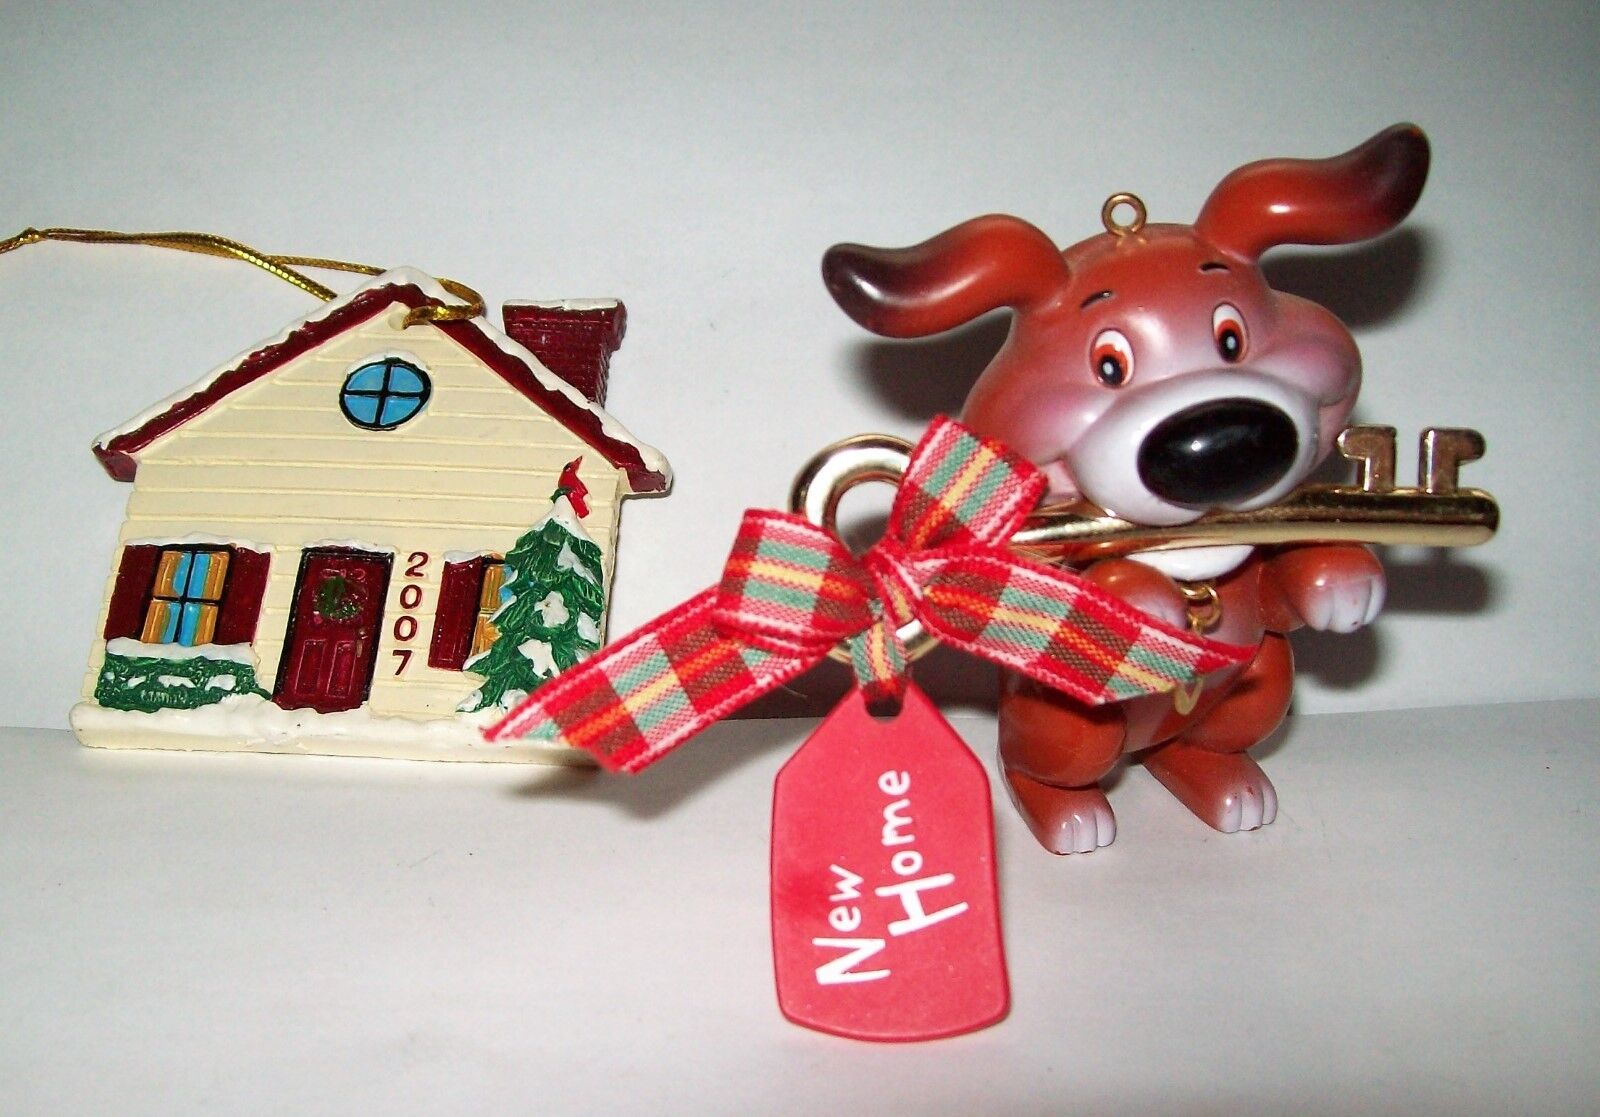 Lot of 2 Christmas Ornaments New Home Puppy Dog w/ Key + 2007 2-story House Snow